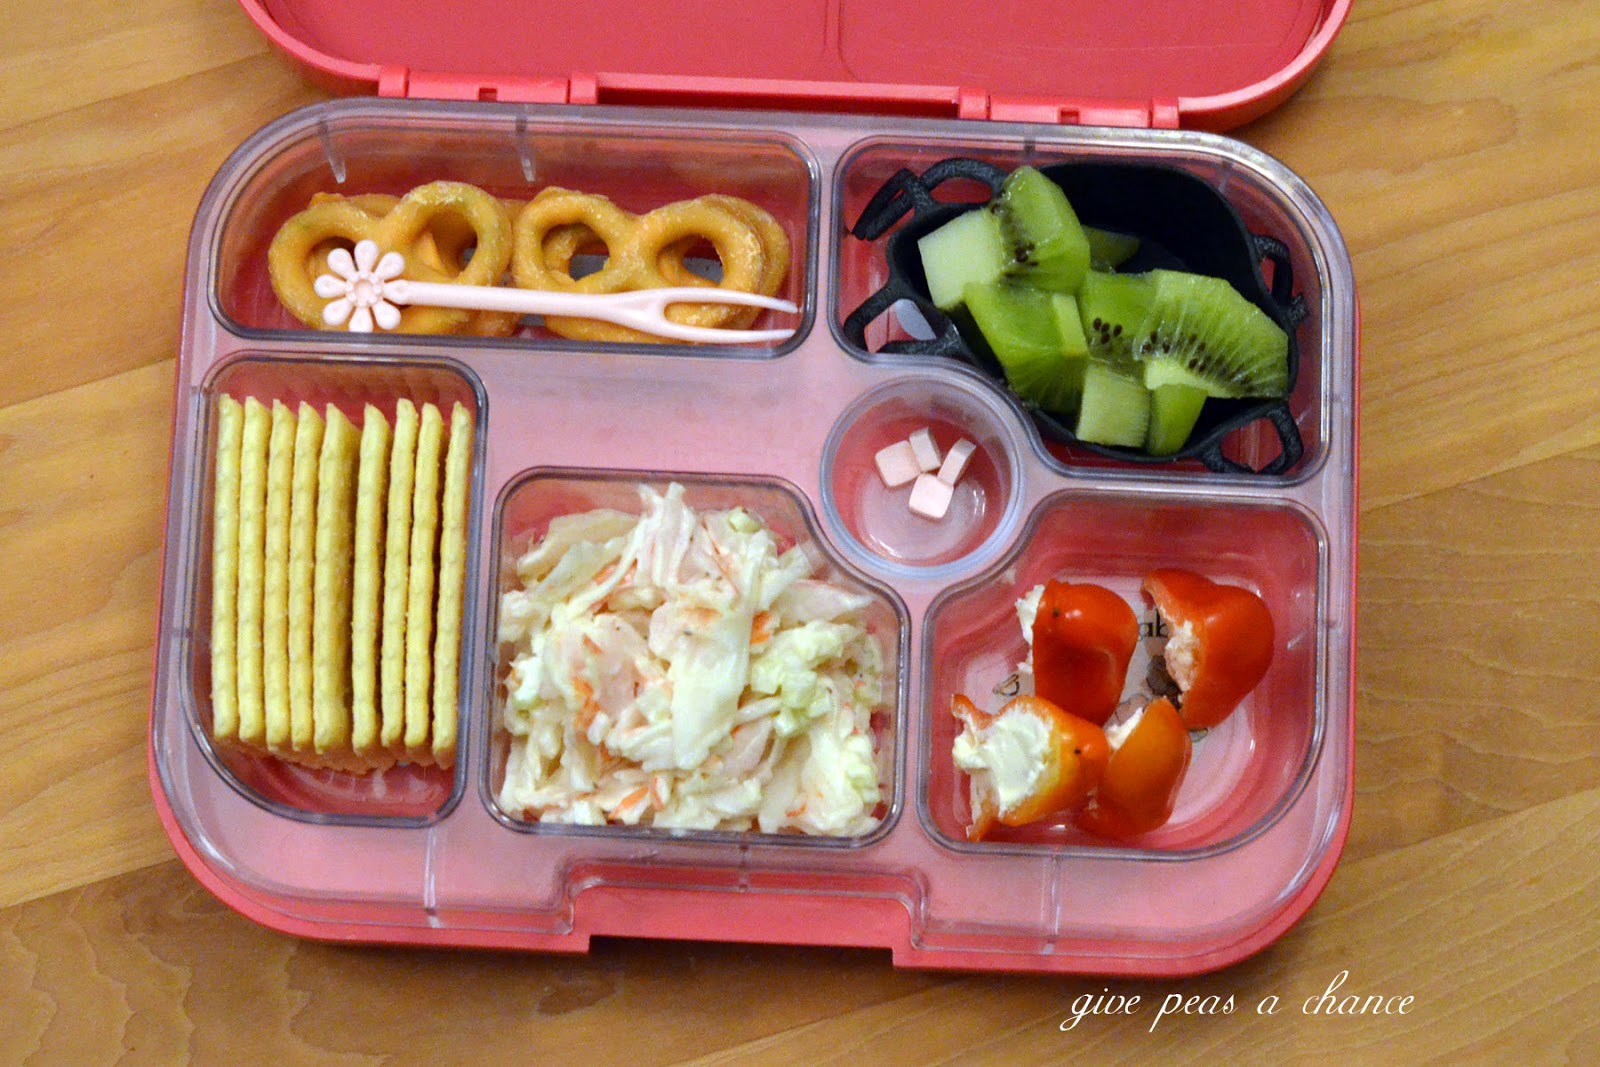 Give Peas a Chance: 2015 Bento Lunches 62- 75 #takeitTuesday